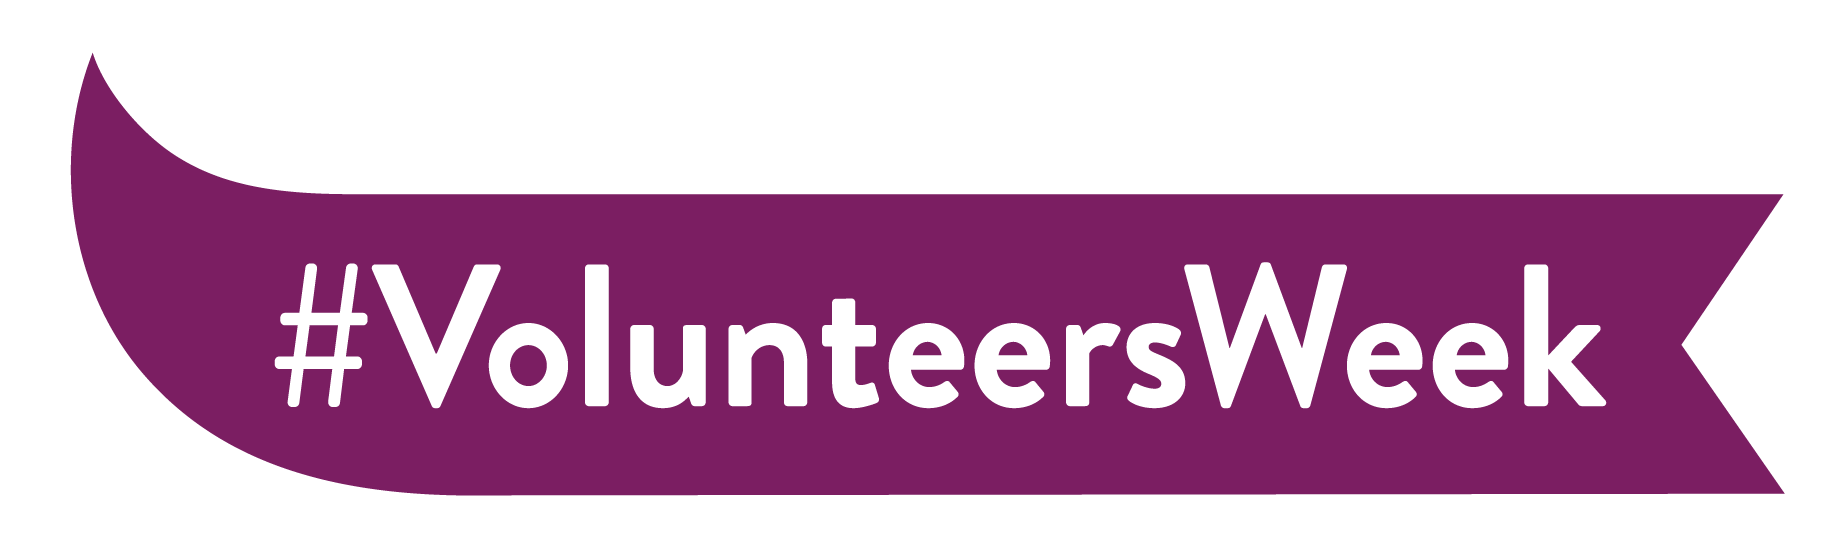 A graphic of a strap line banner with the text '#VolunteersWeek'